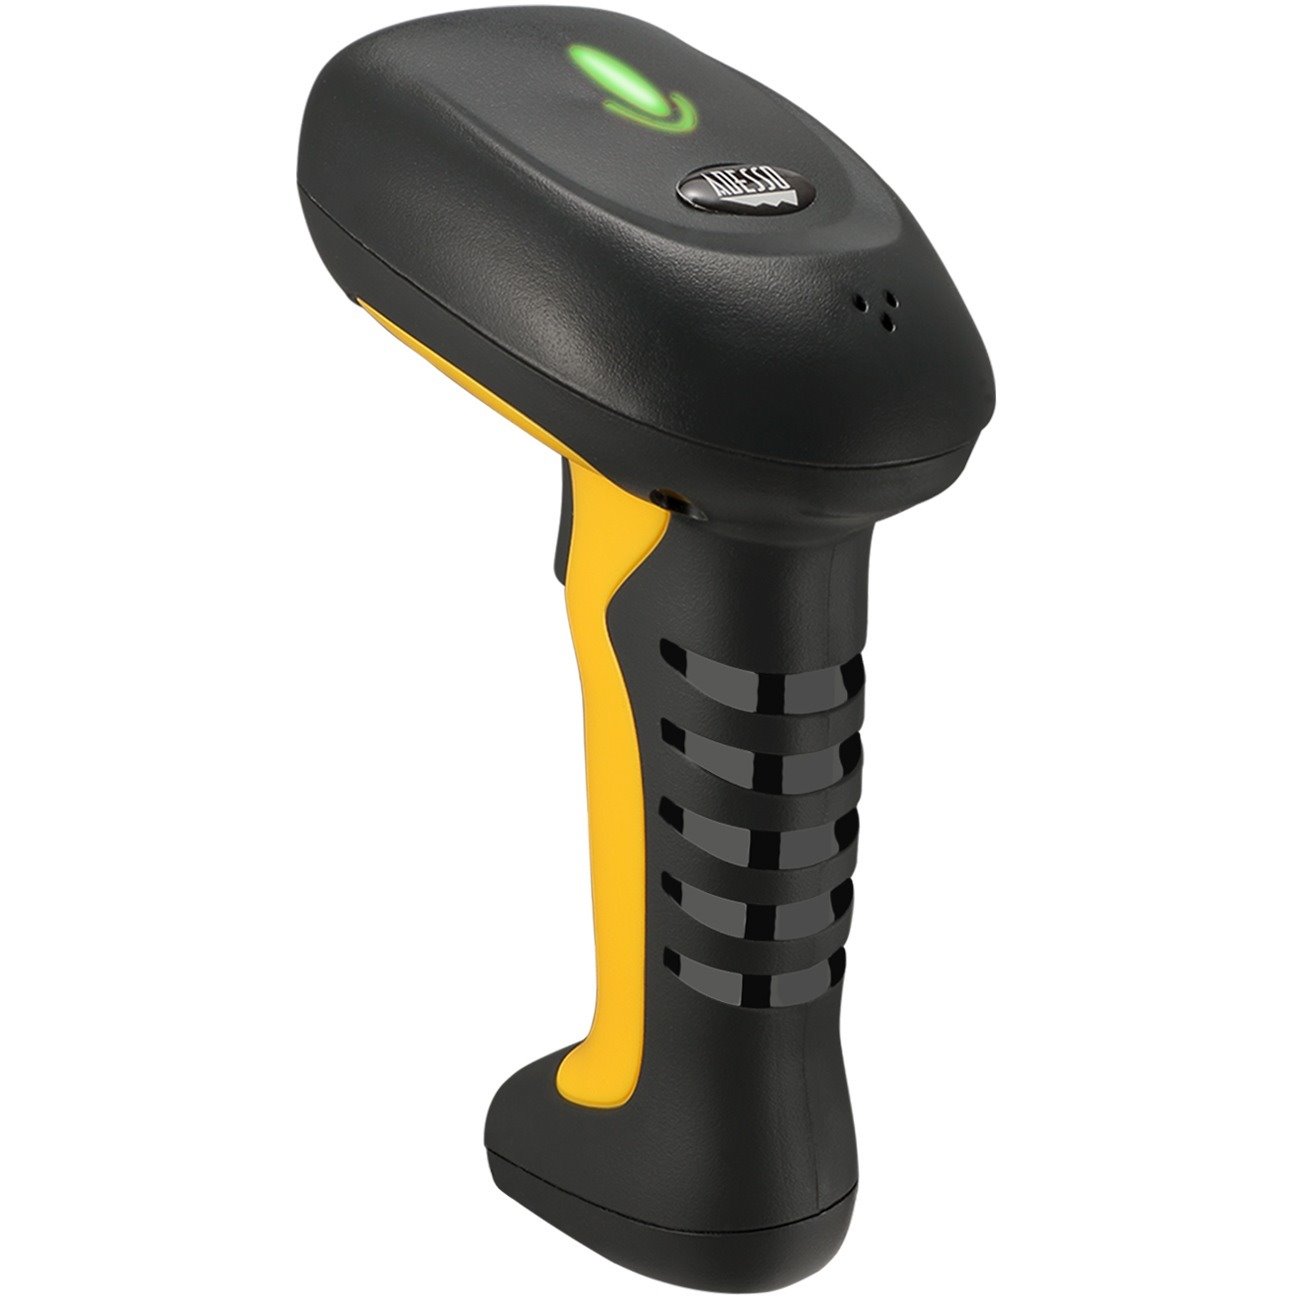 Adesso NuScan 5200TR Healthcare, Library, Warehouse, Logistics Handheld Barcode Scanner - Wireless Connectivity